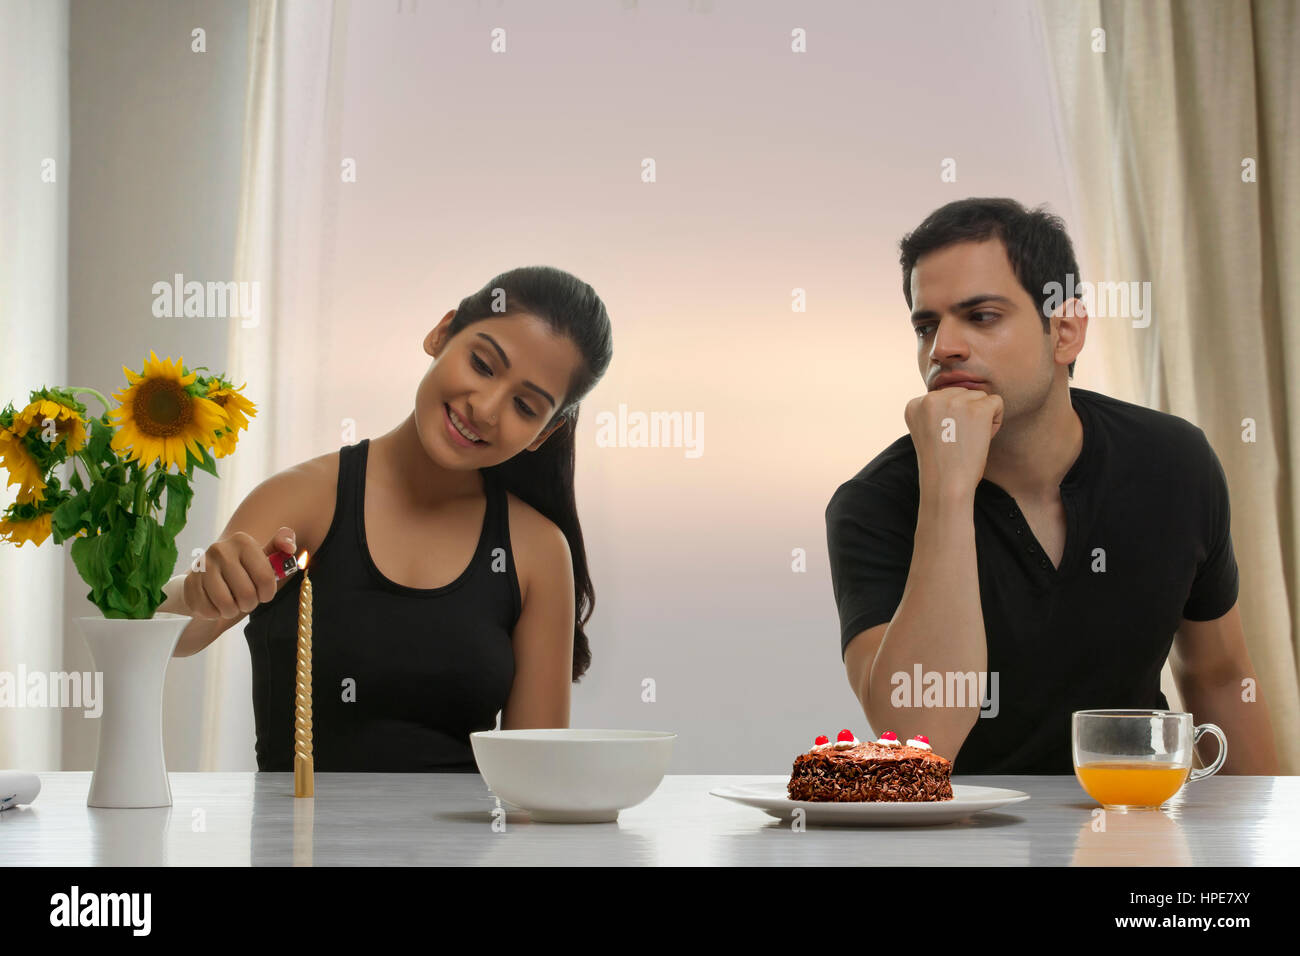 Serious man looking at woman lighting candle at table with cake Stock Photo